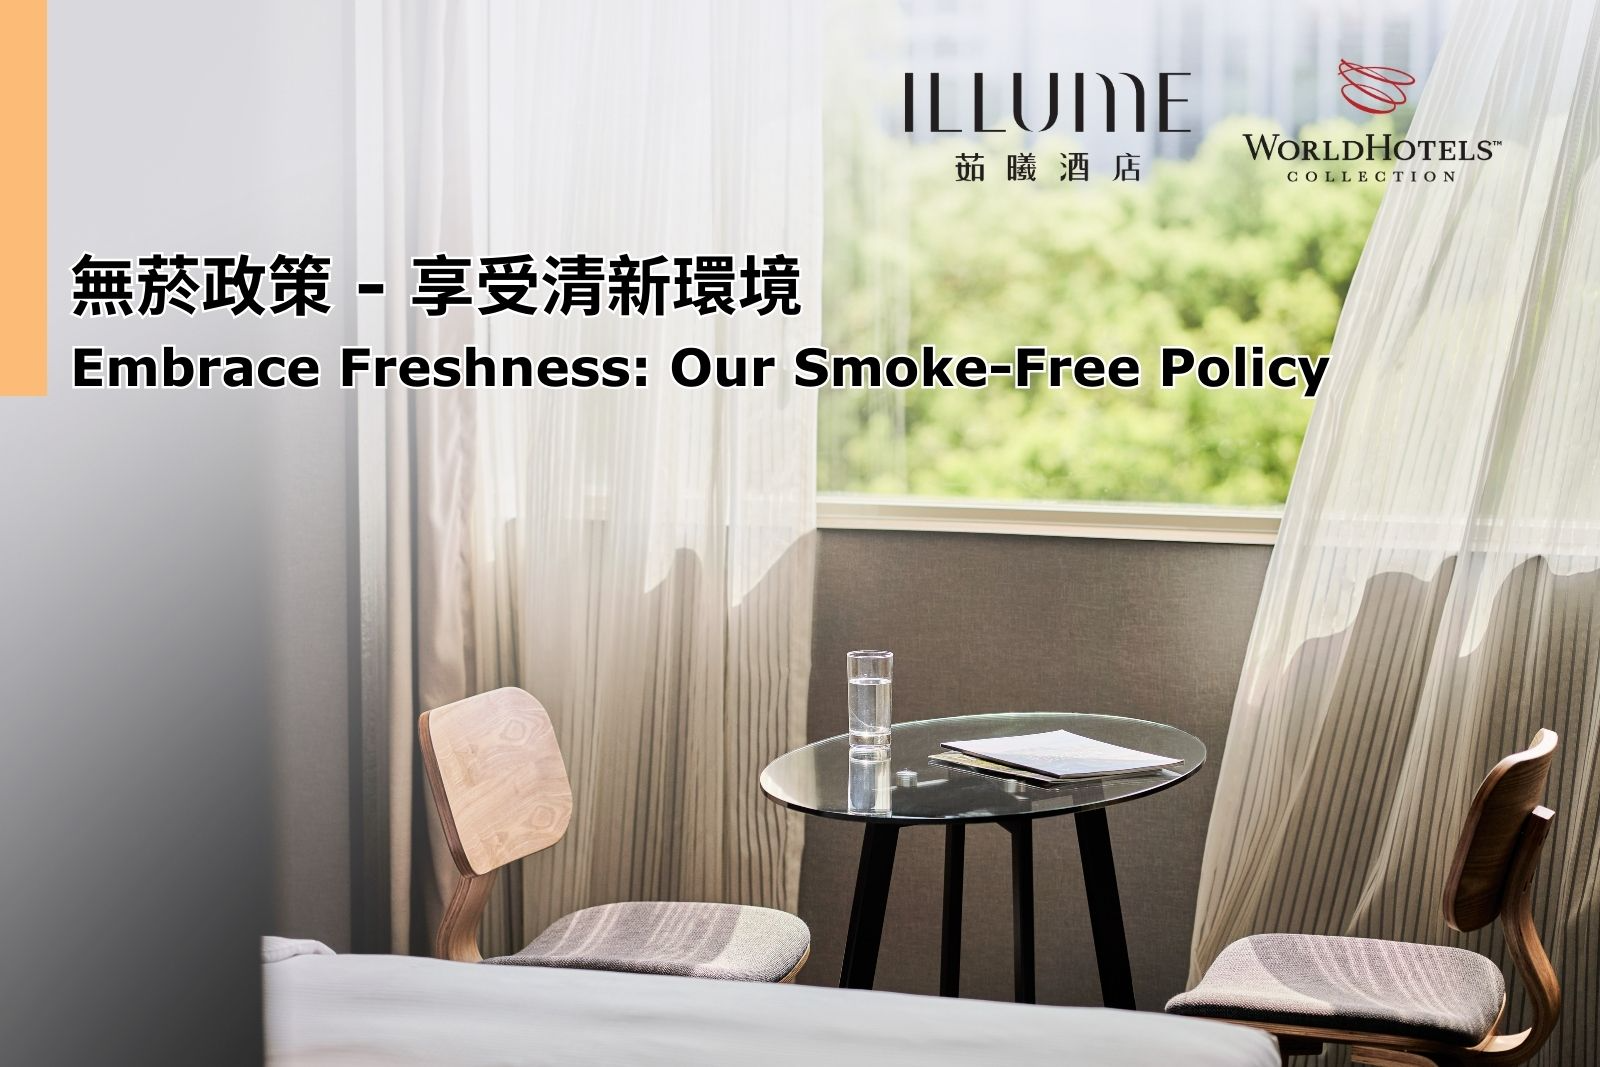 Embrace Freshness: Our Smoke-Free Policy